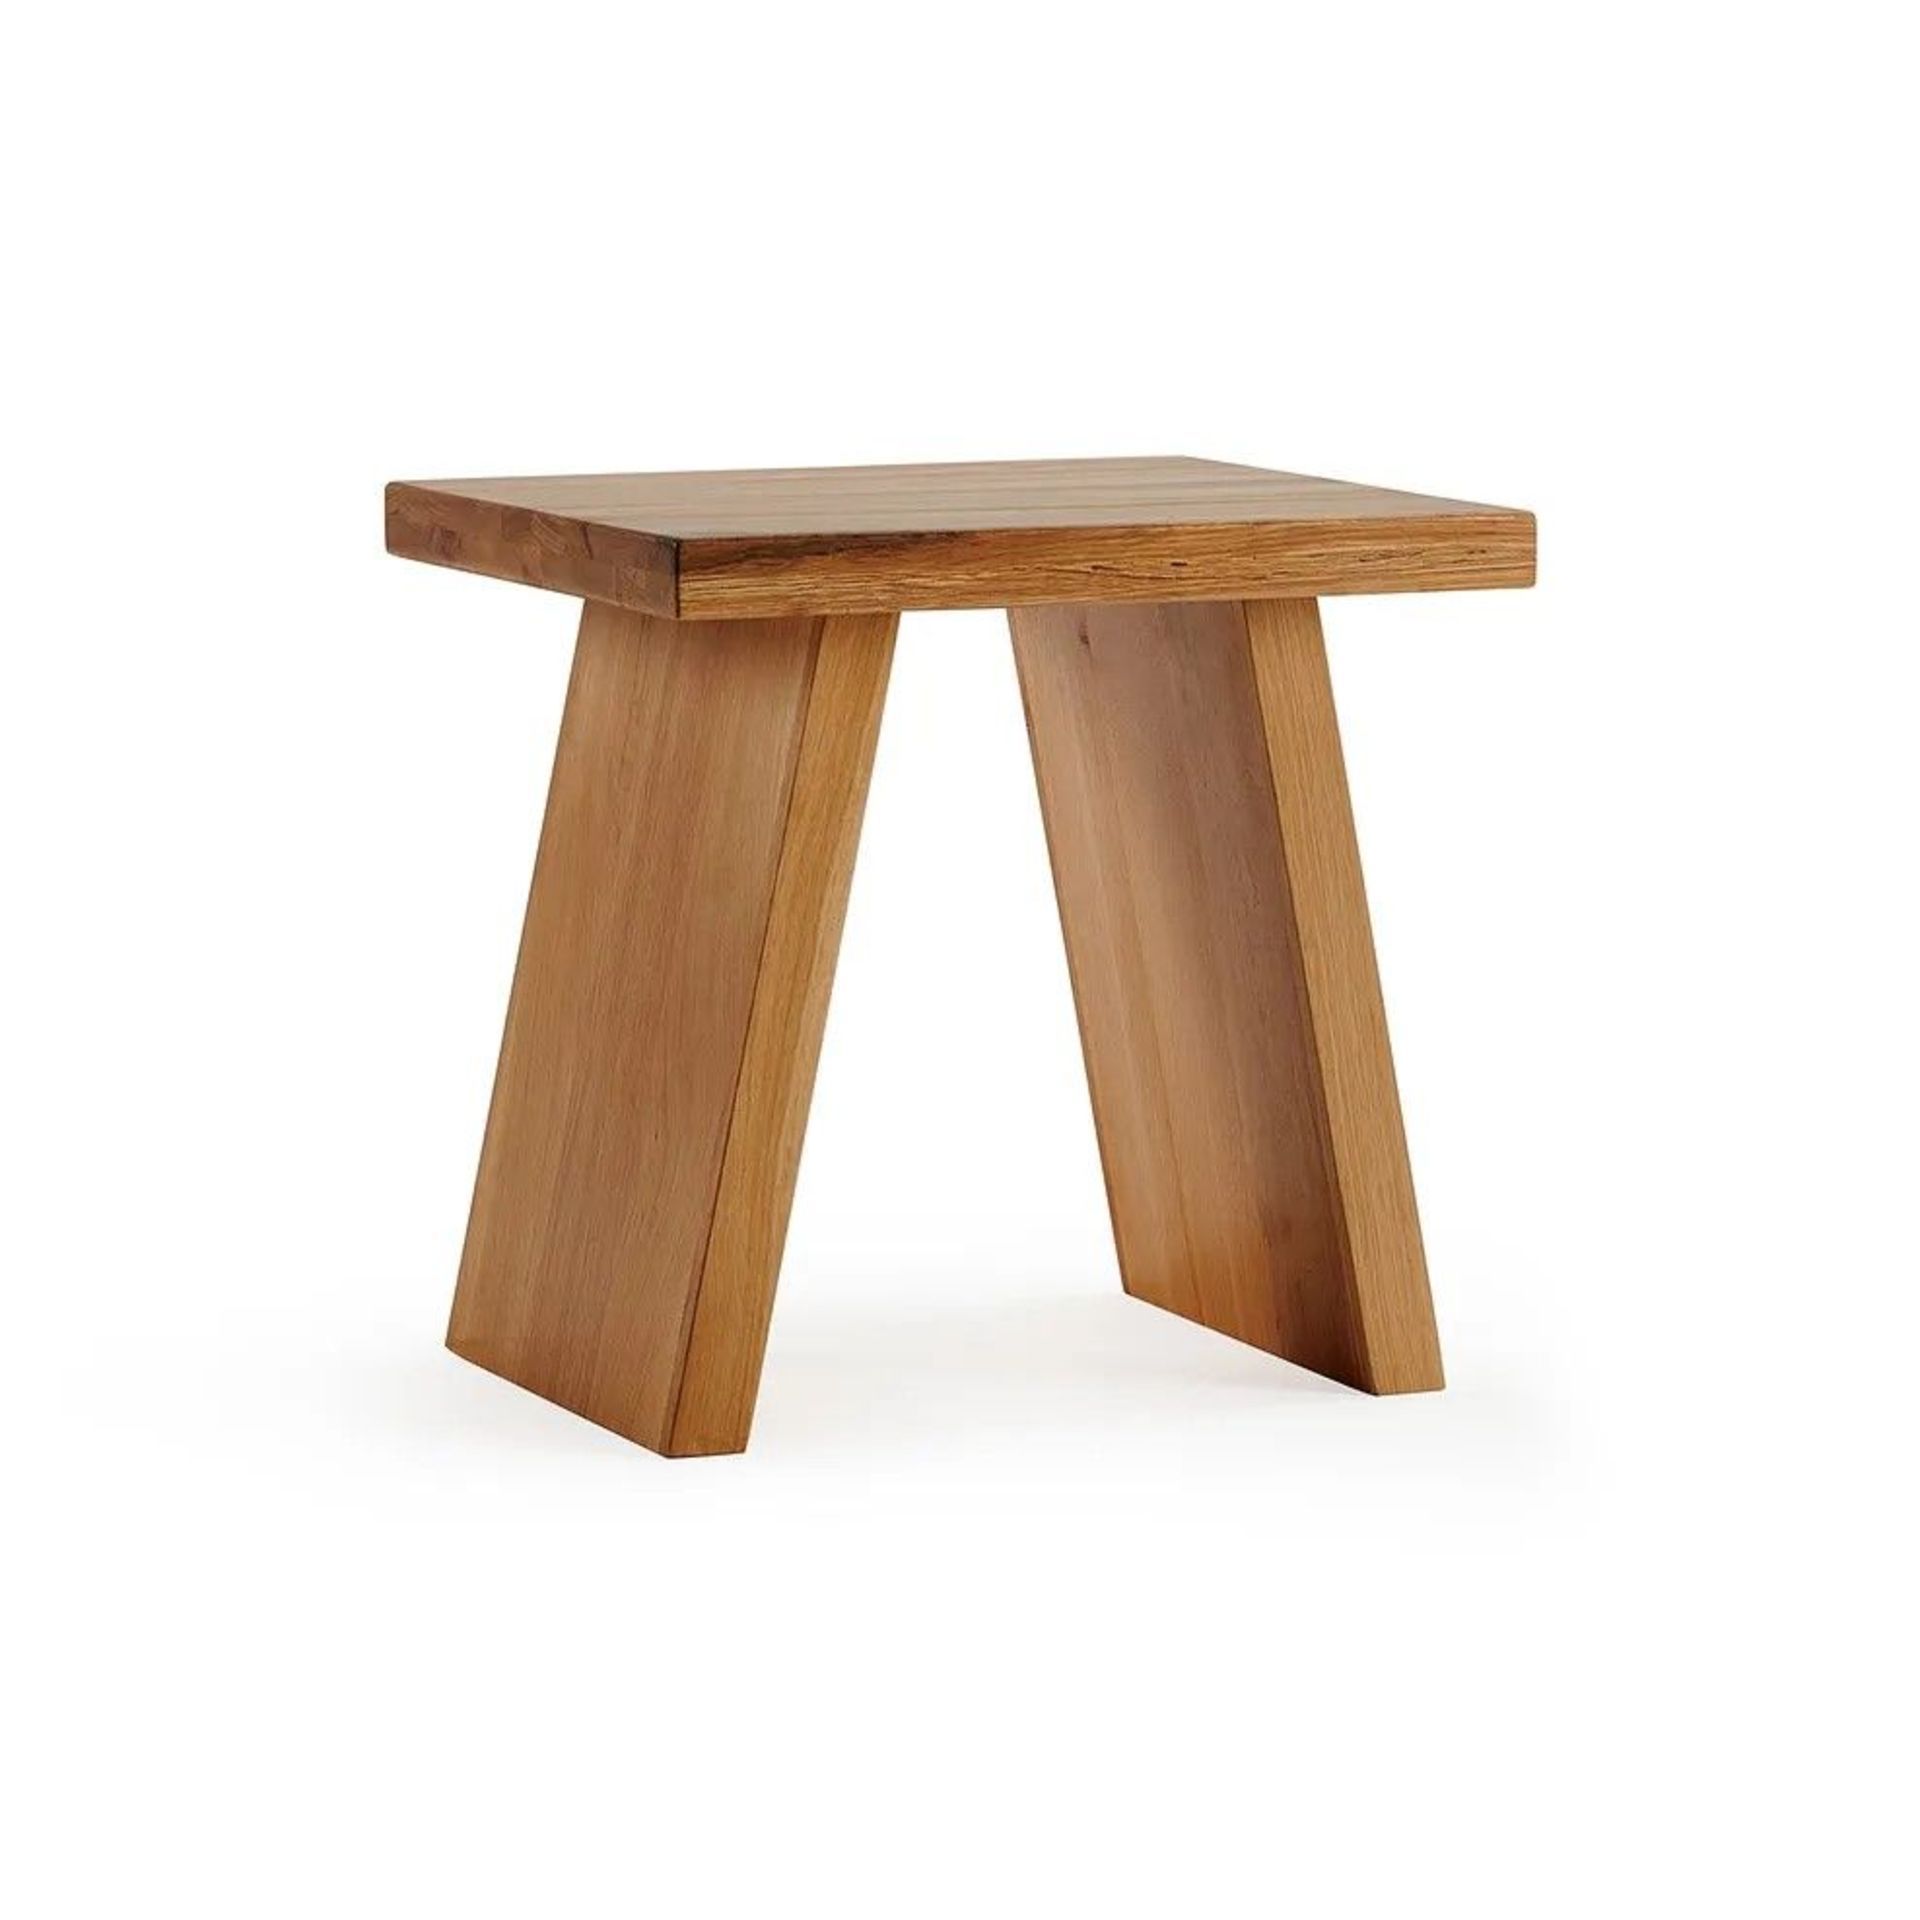 4 X NEW BOXED Natural Solid Oak Stool. RRP £130 EACH, TOTAL RRP £520. For a more open seating